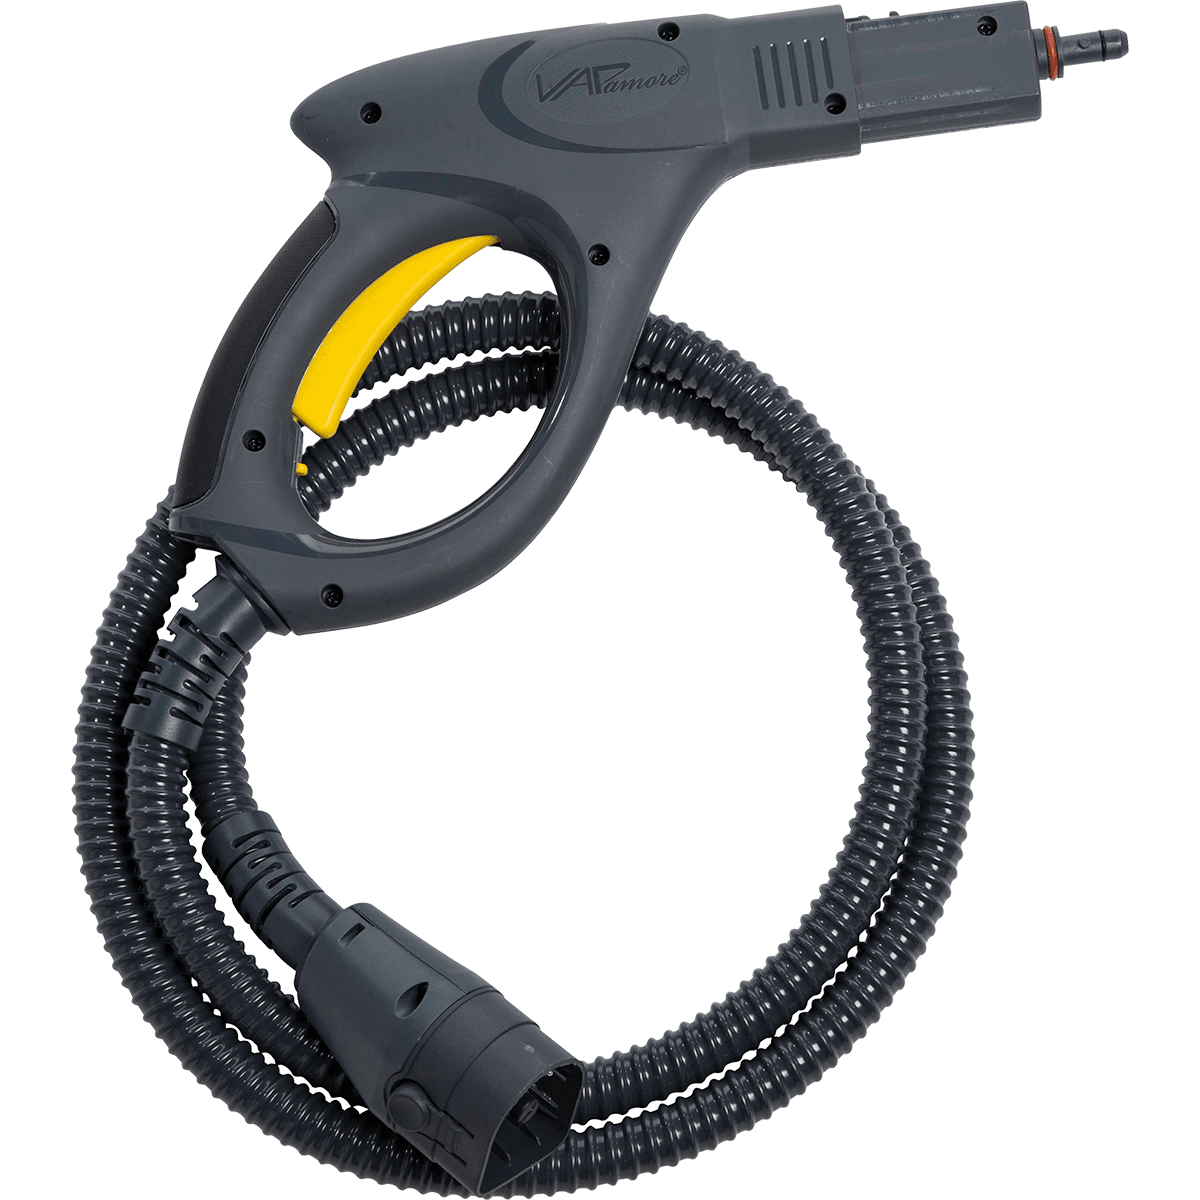 Vapamore New Style Primo Steam Gun And Hose